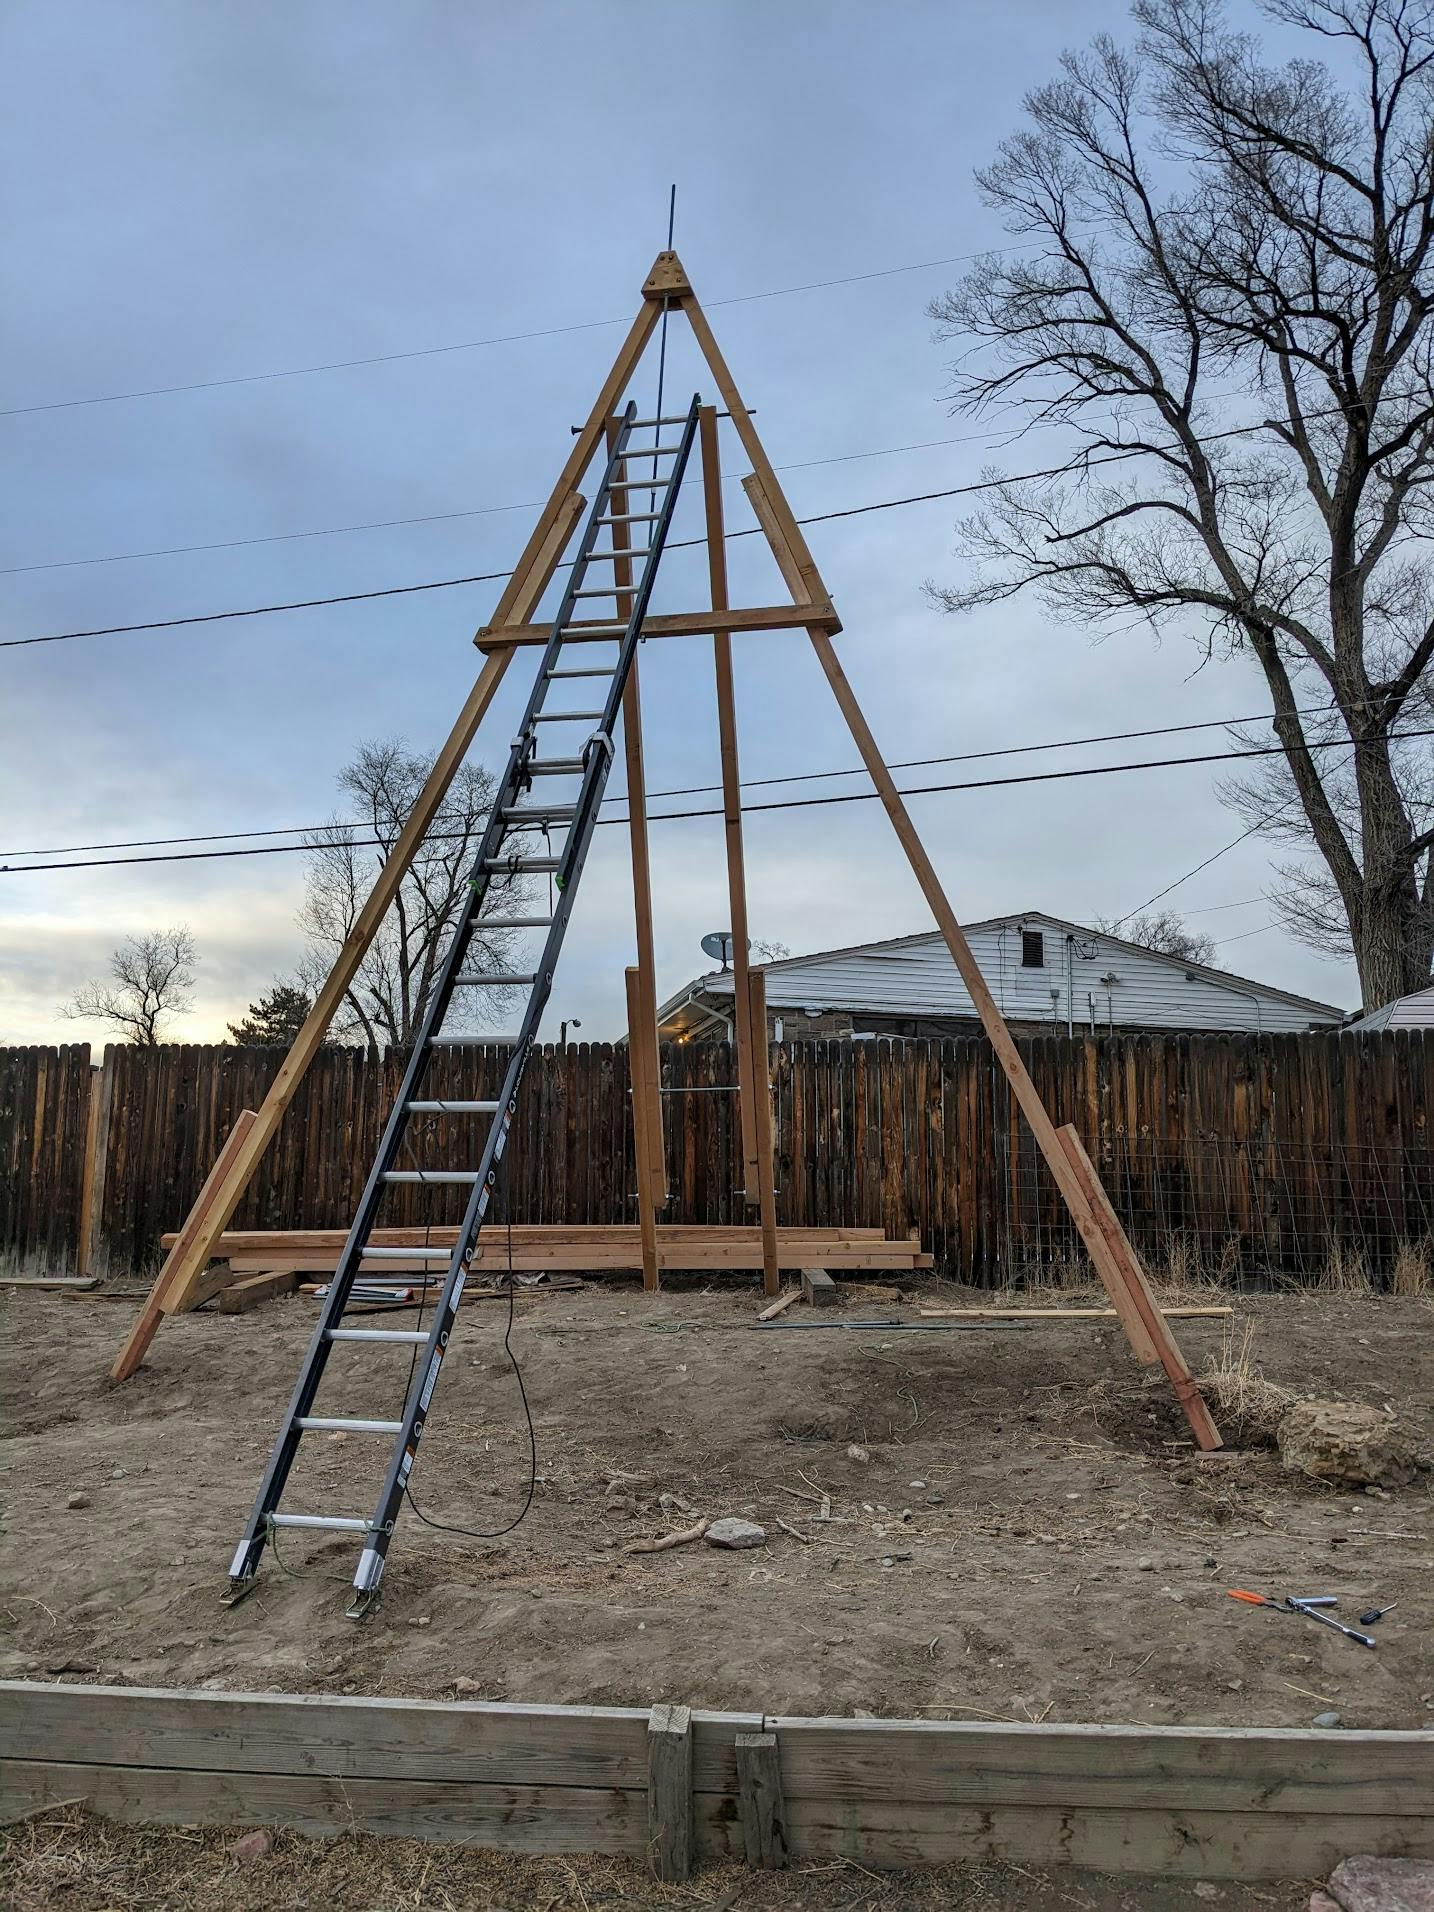 A wooden pyramid with a ladder as one edge, taller than my neighbor's house behind it.